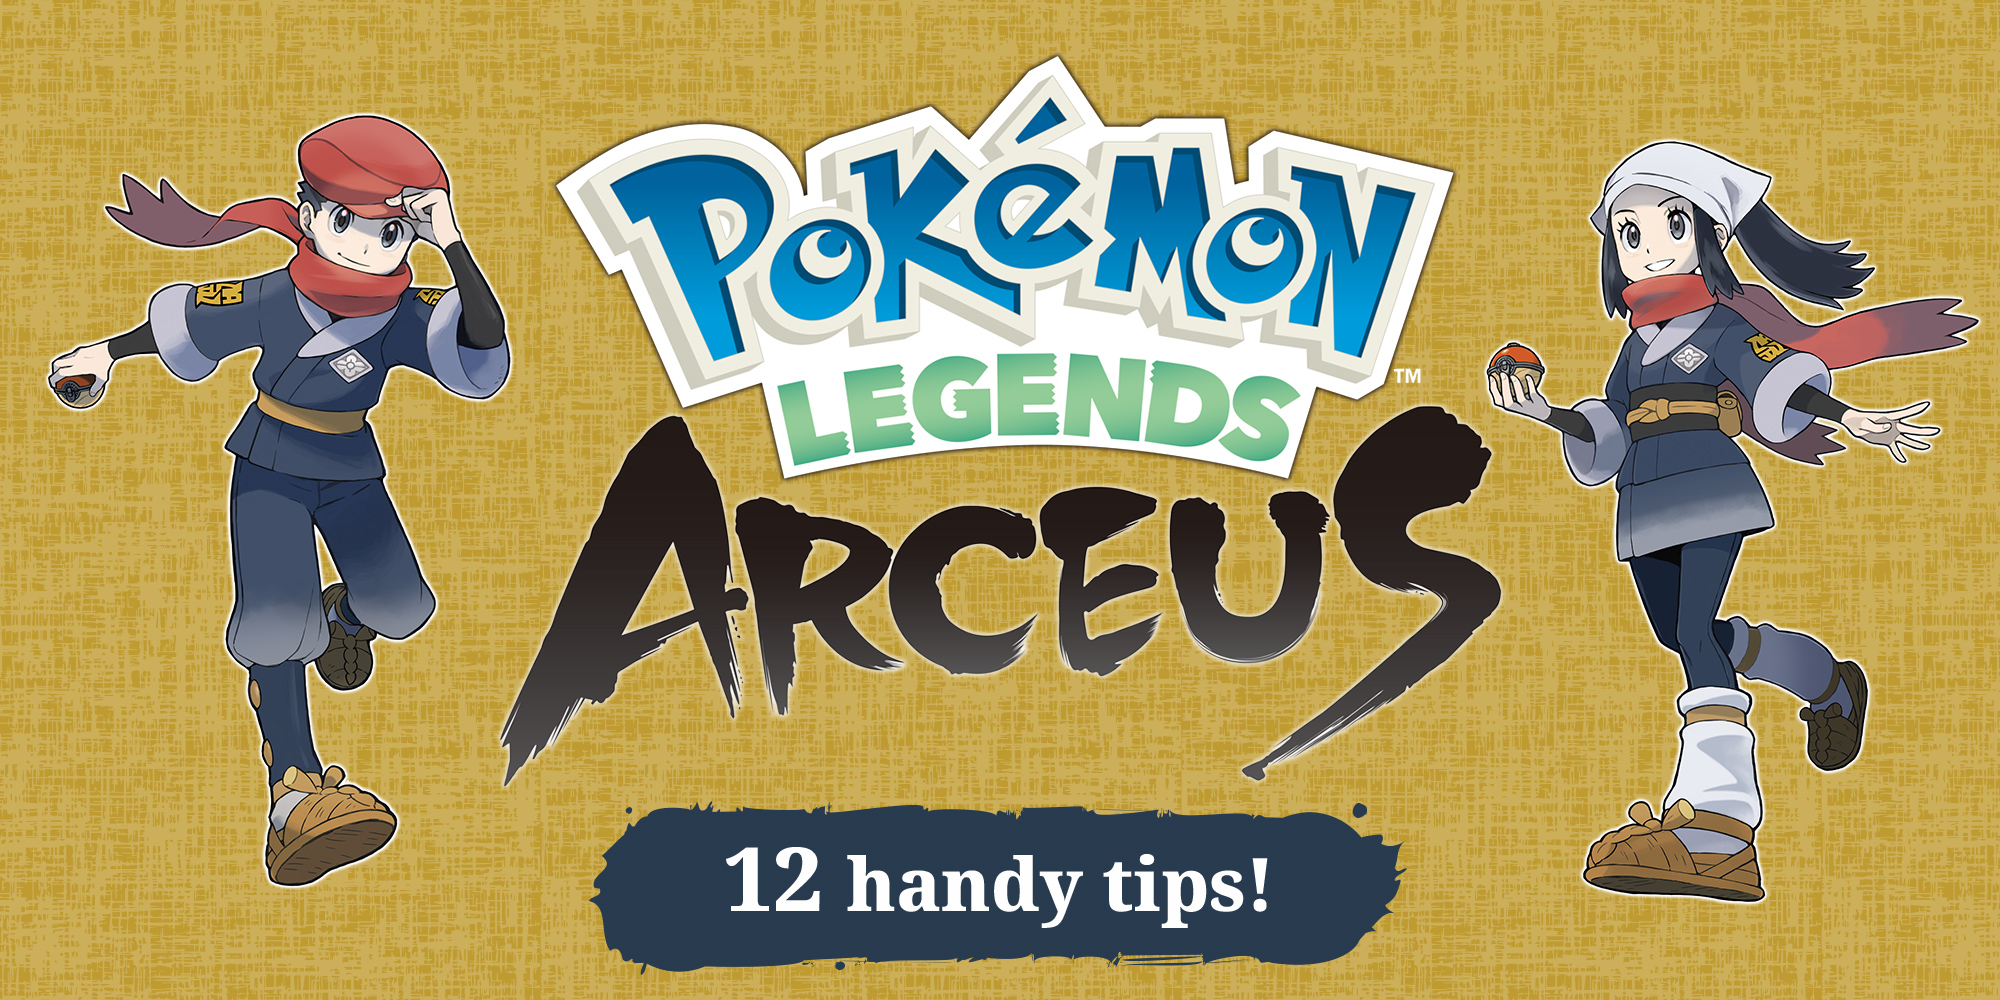 7 Pokemon Legends: Arceus Tips That'll Help You Catch 'Em All